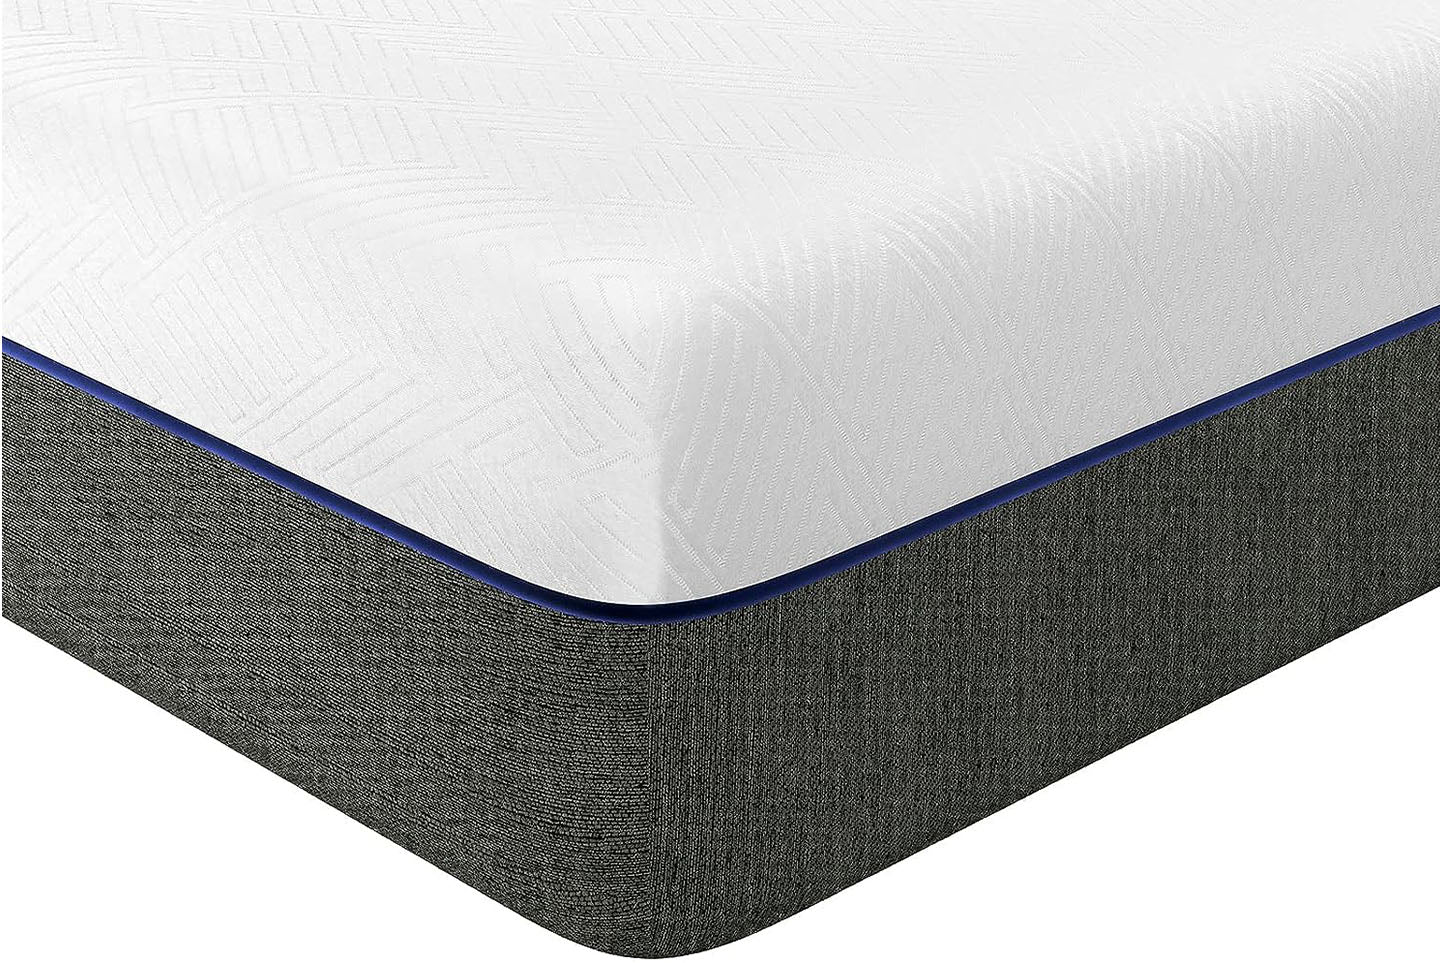 Memory Foam Mattress, Soft Fabric, Skin-friendly Mattress, Breathable Cover, 2 Layer for More Supportive 4FT6 Double (135x190x20cm)